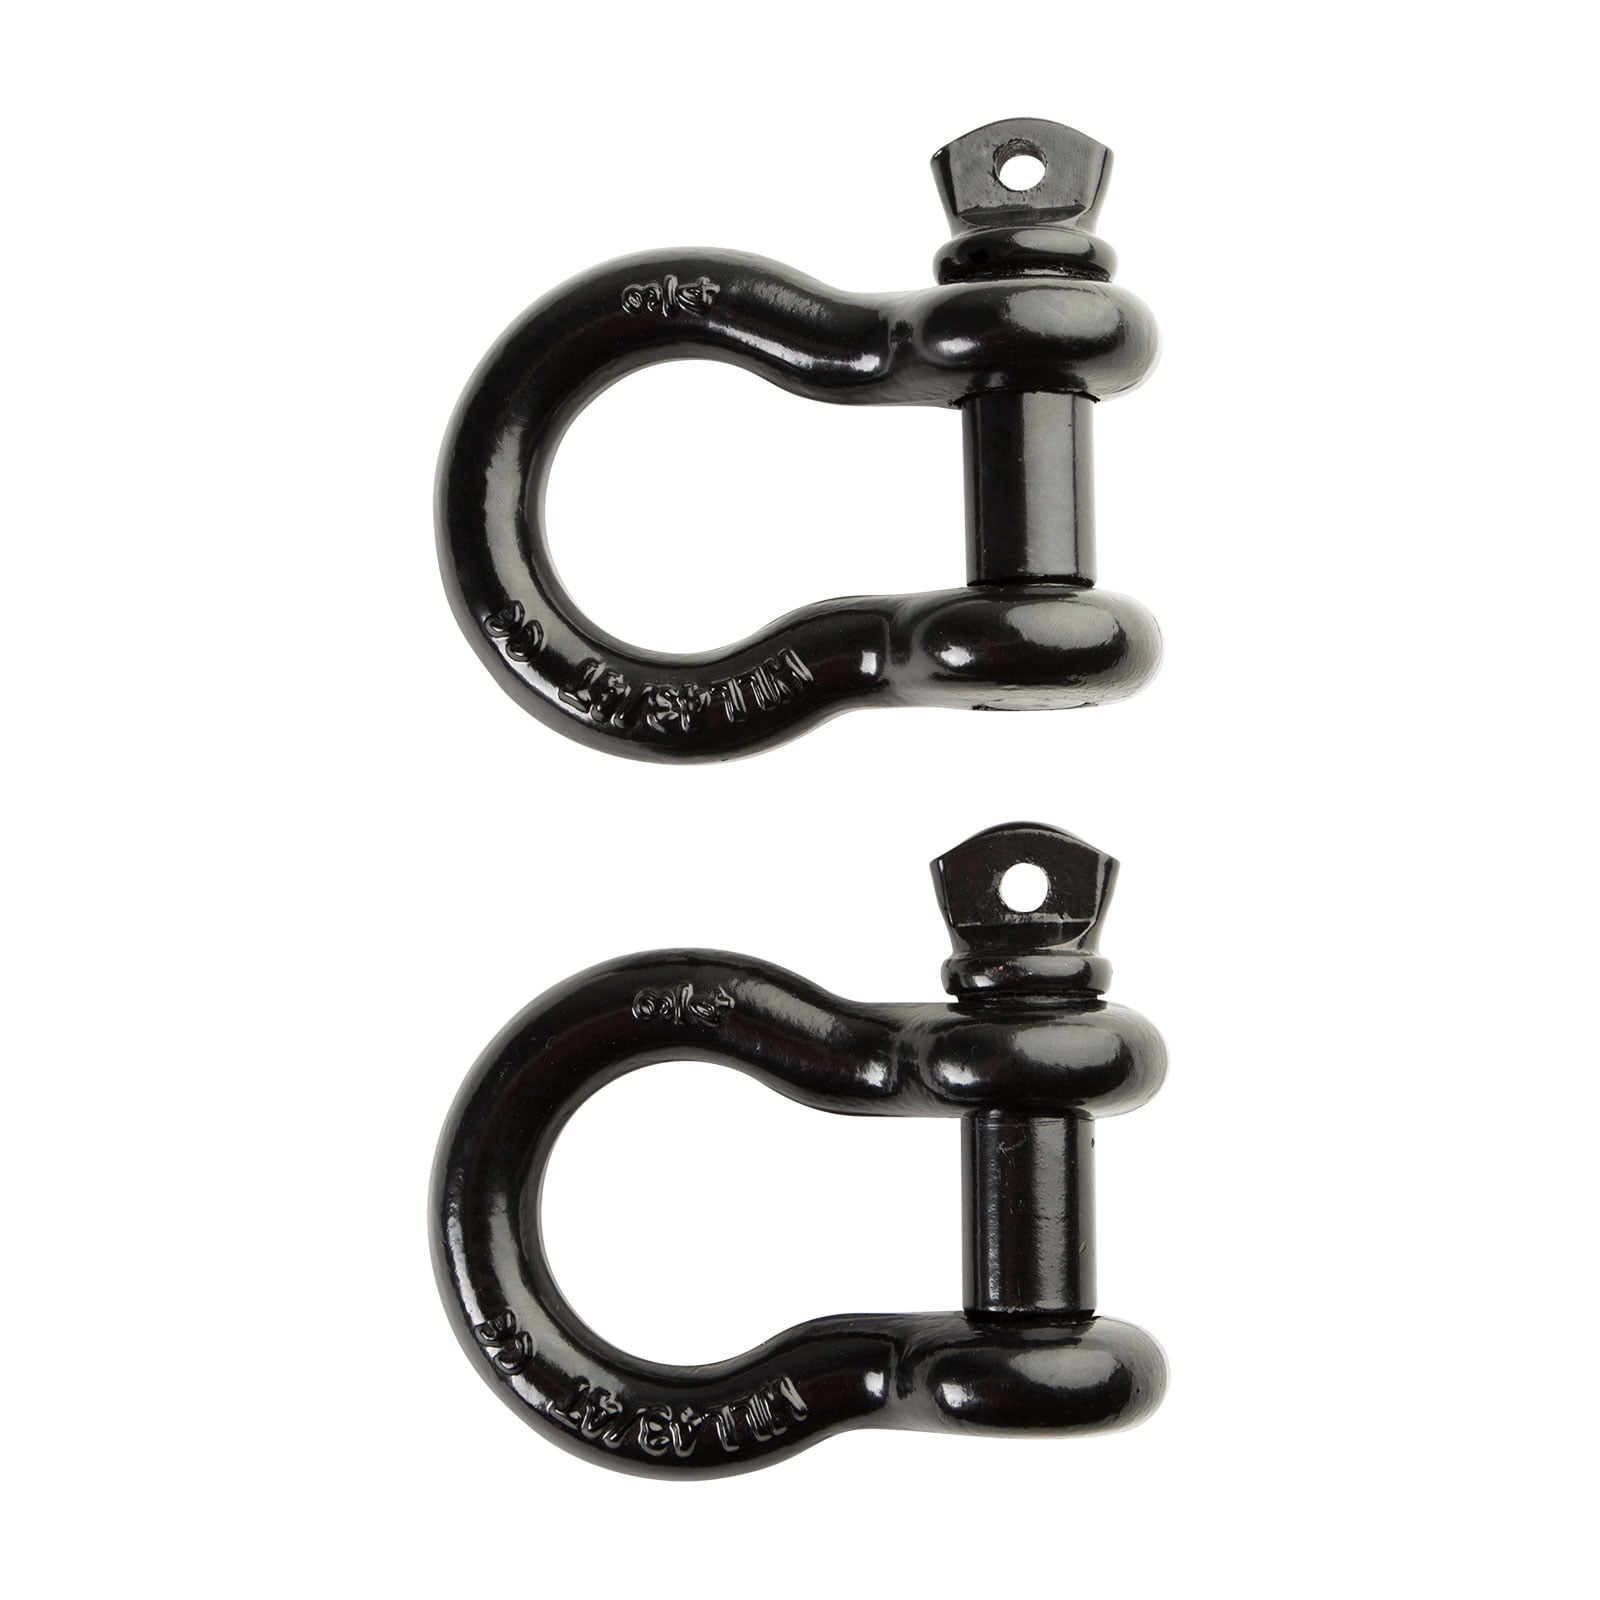 4.75 tons Galvanized Bow Shackles 3/4" with 7/8" Pin Winch Recovery Towing 4x4 